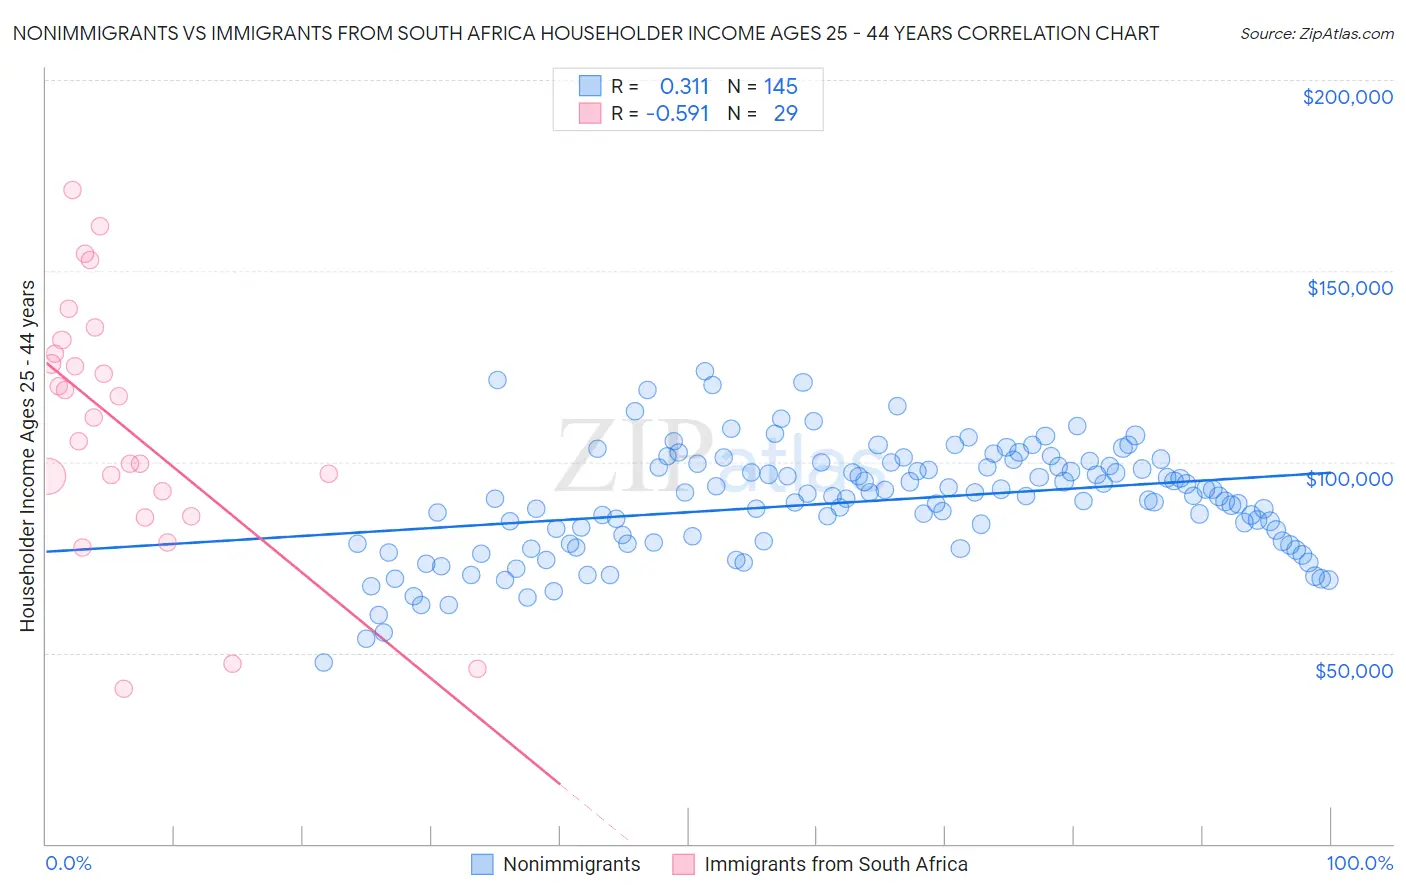 Nonimmigrants vs Immigrants from South Africa Householder Income Ages 25 - 44 years